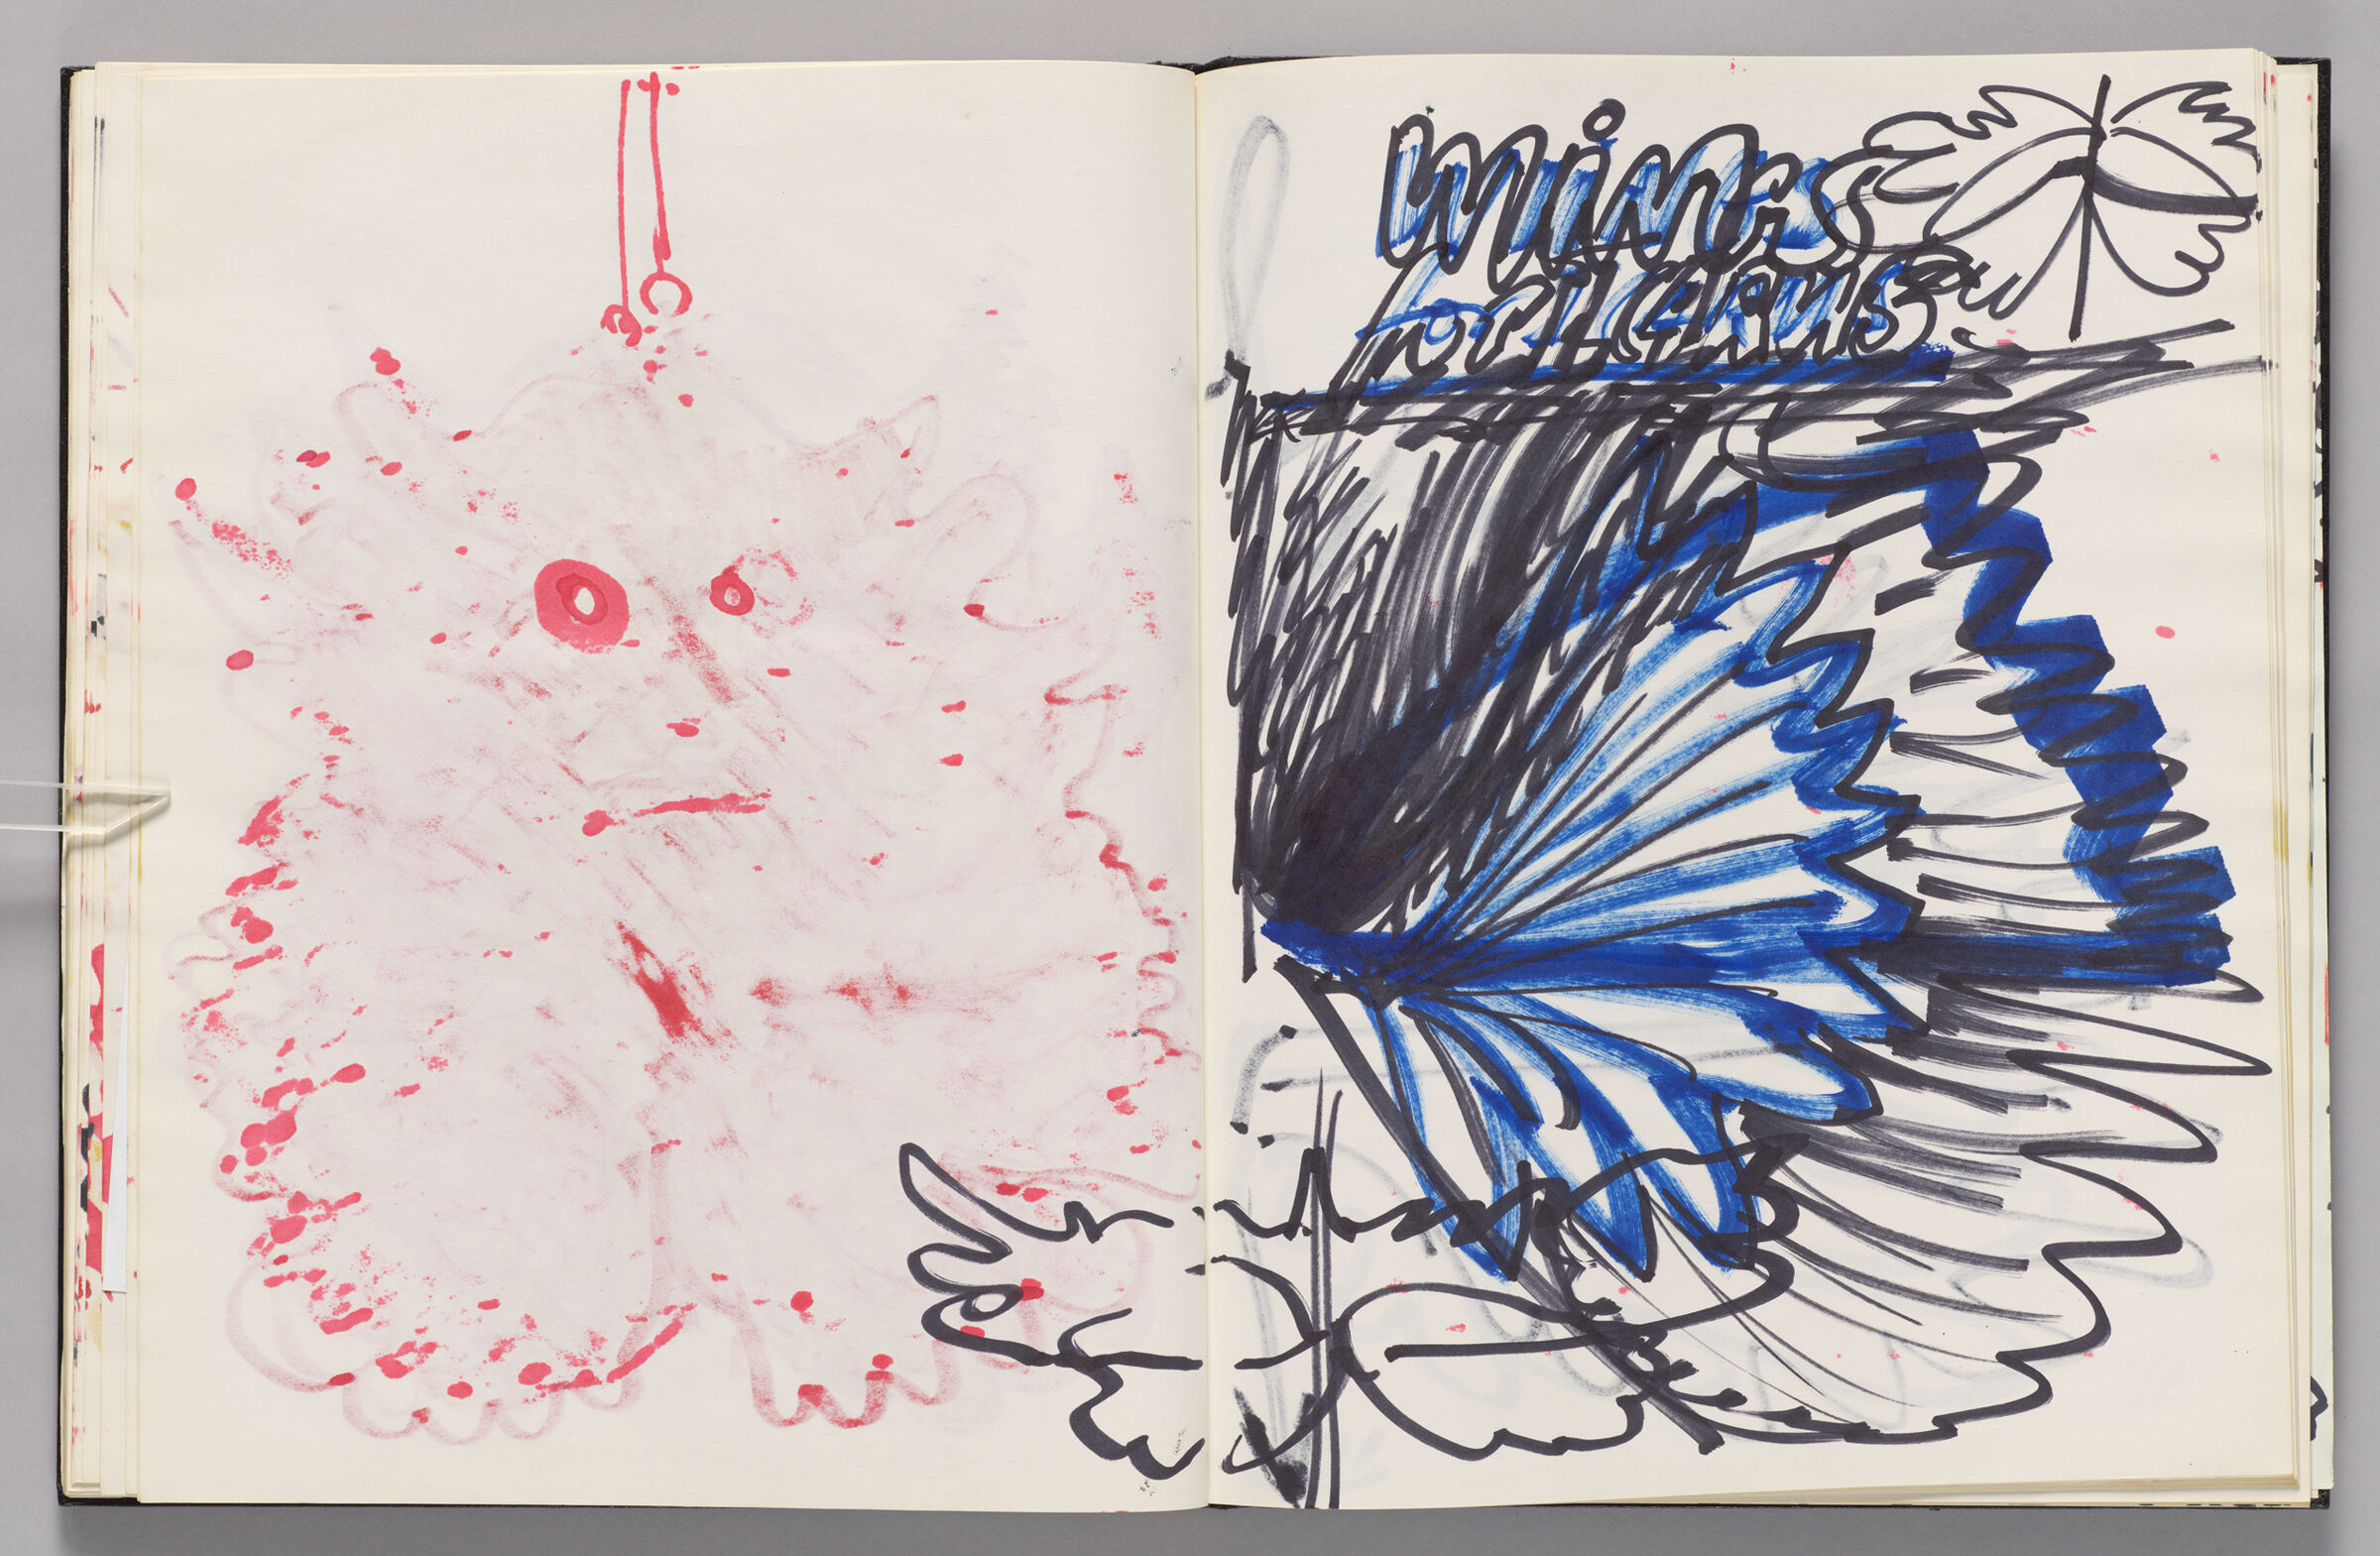 Untitled (Bleed-Through Of Previous Page With Wing Sketches, Two-Page Spread)